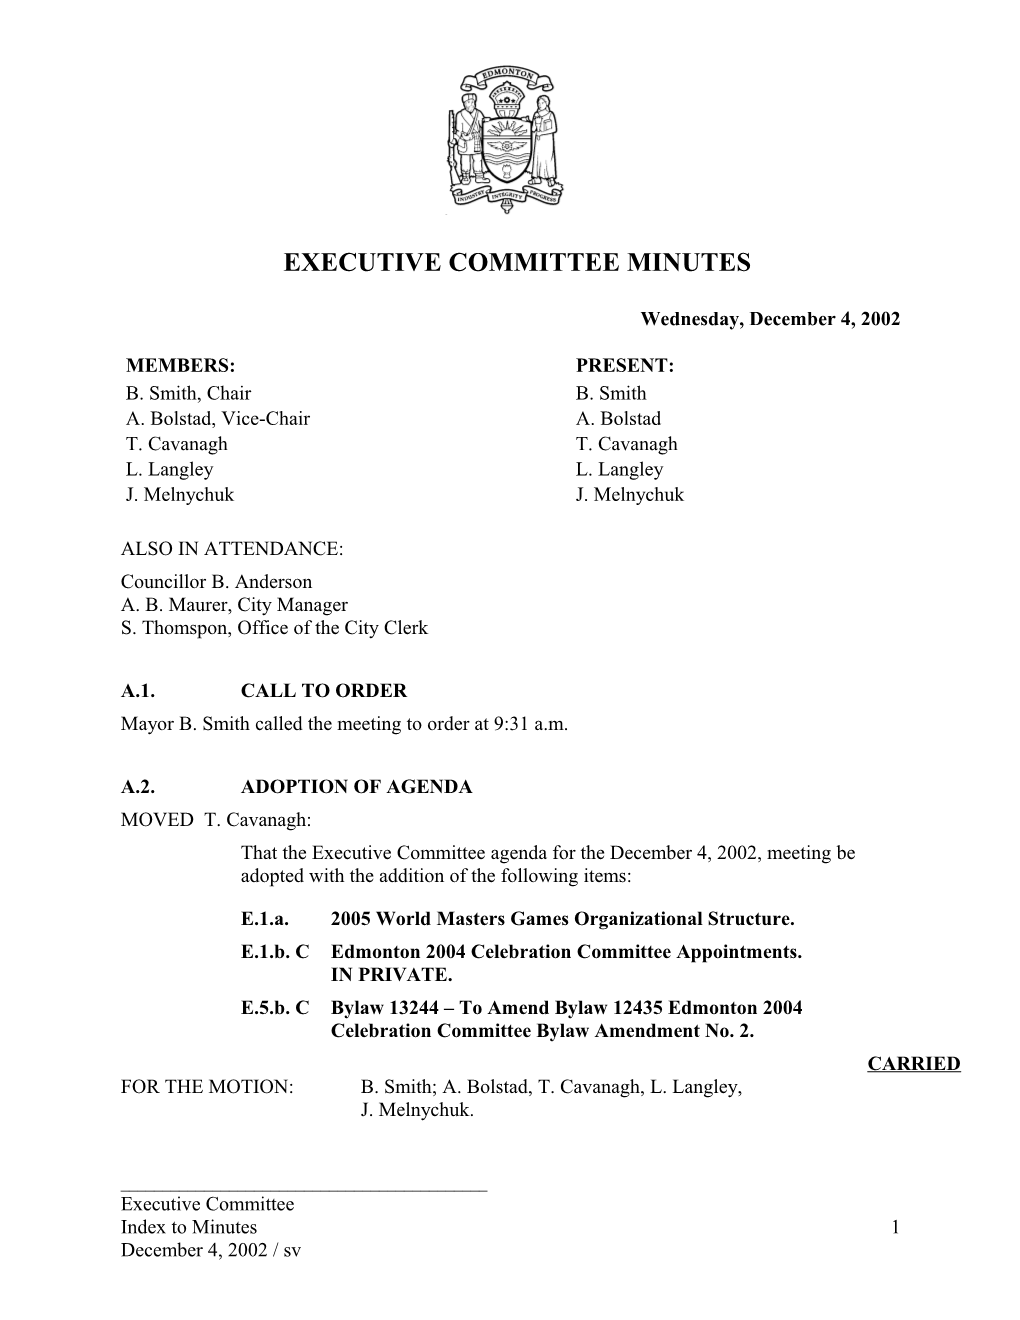 Minutes for Executive Committee December 4, 2002 Meeting